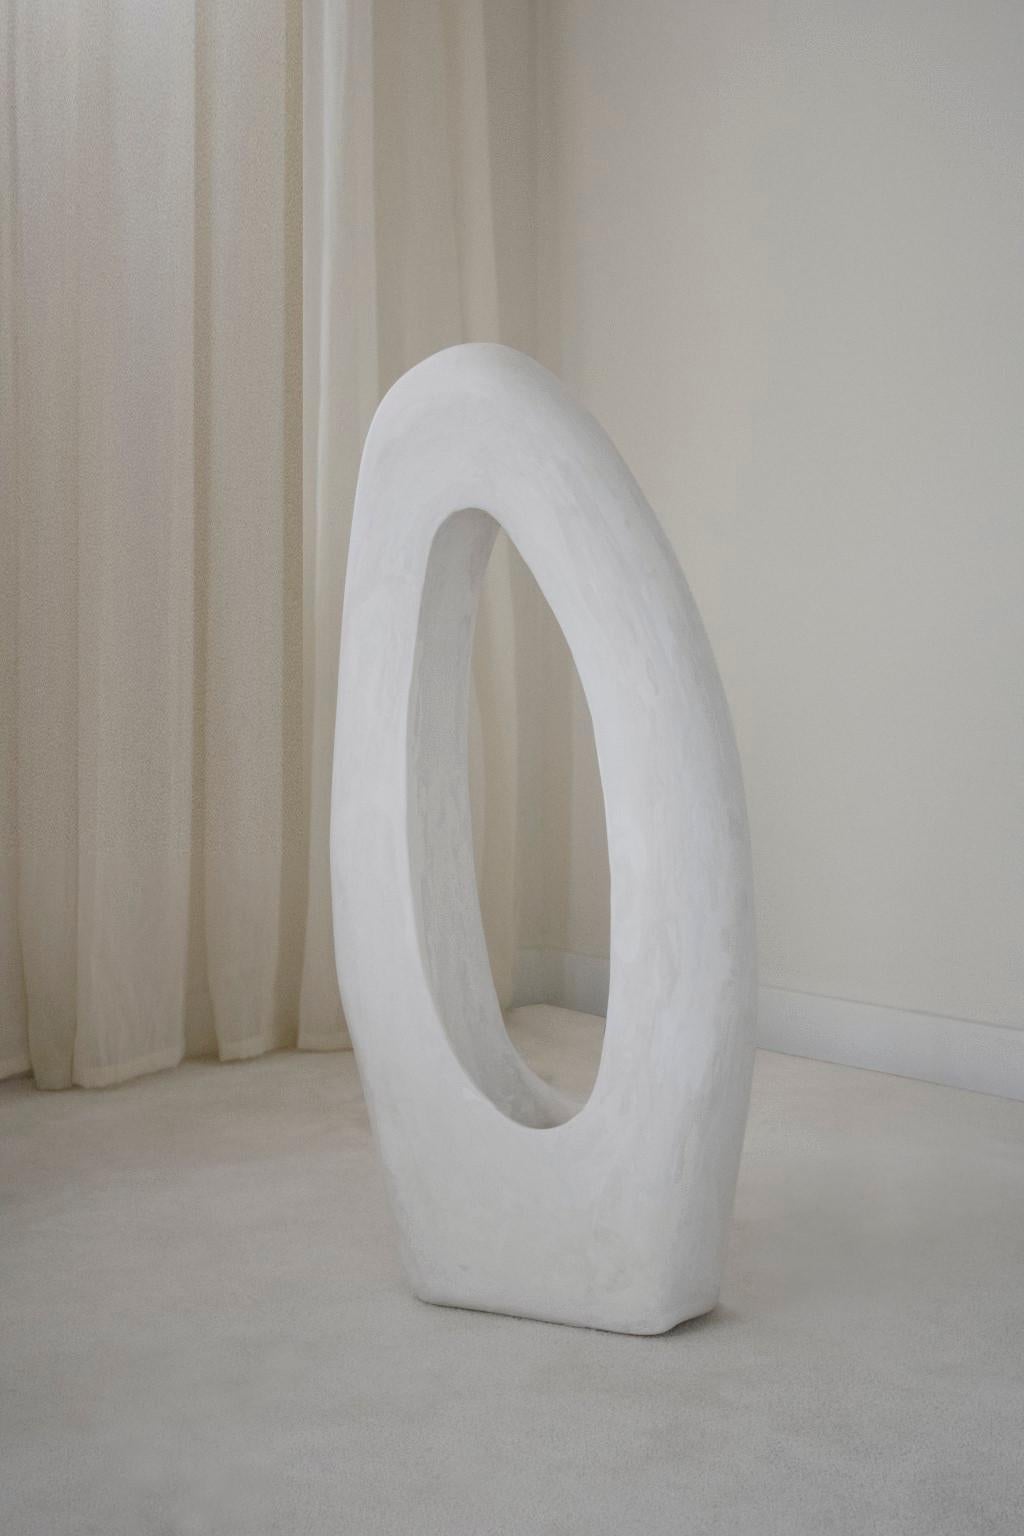 Big Lacuna lamp by AOAO
Dimensions: W 60 x D 20 x H 135 cm
Materials: White Plaster
Color options available upon request. 

The idea was born after deciding to reconnect with my family and my grandfather – a sculptor artist. Learning to sculpt